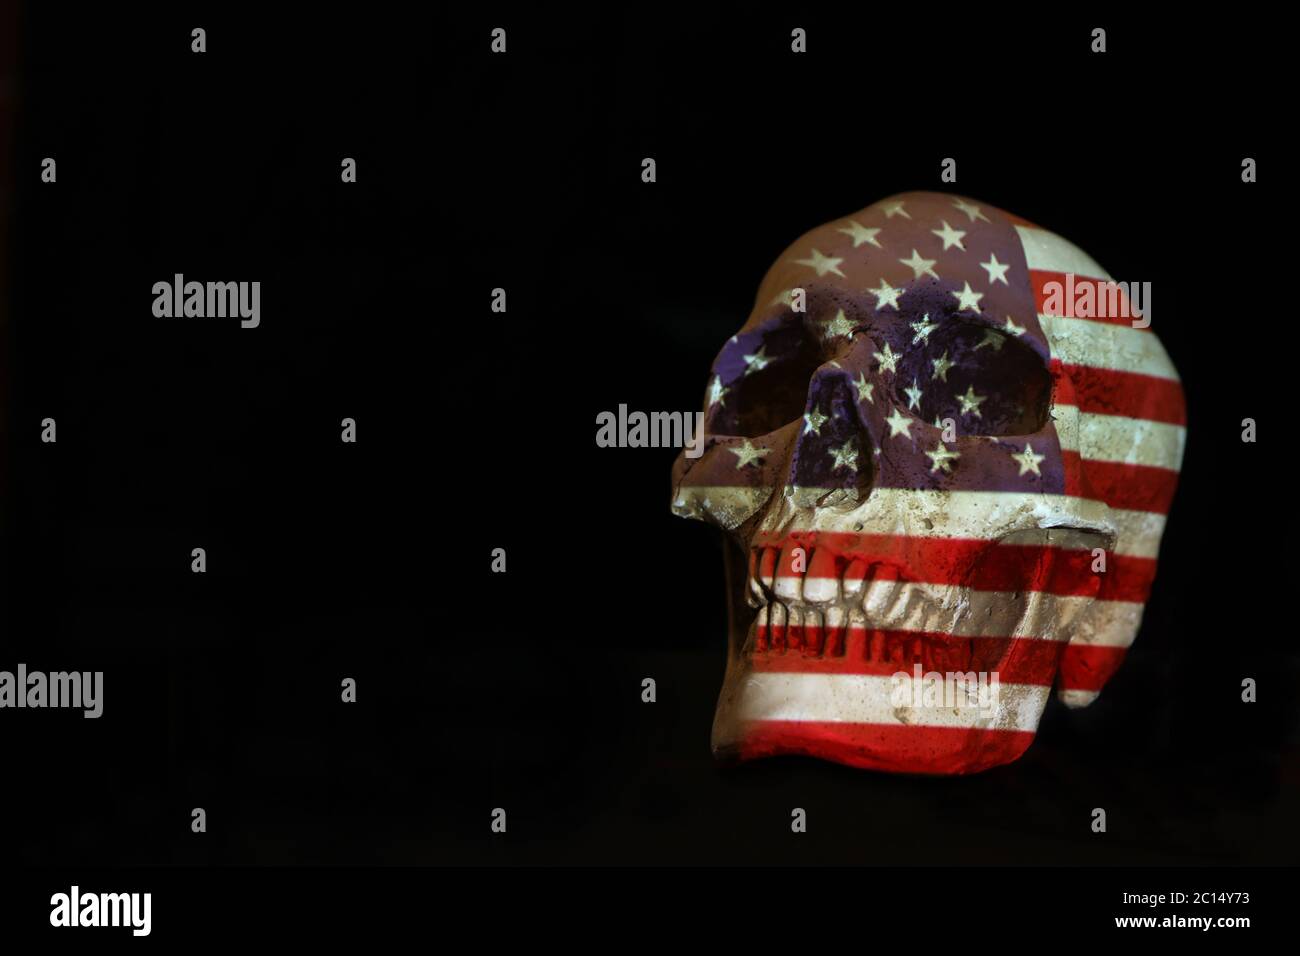 isolated white skull with the American, United States of America flag projected over it. Plain black background. Covid-19 corona virus or gun control Stock Photo